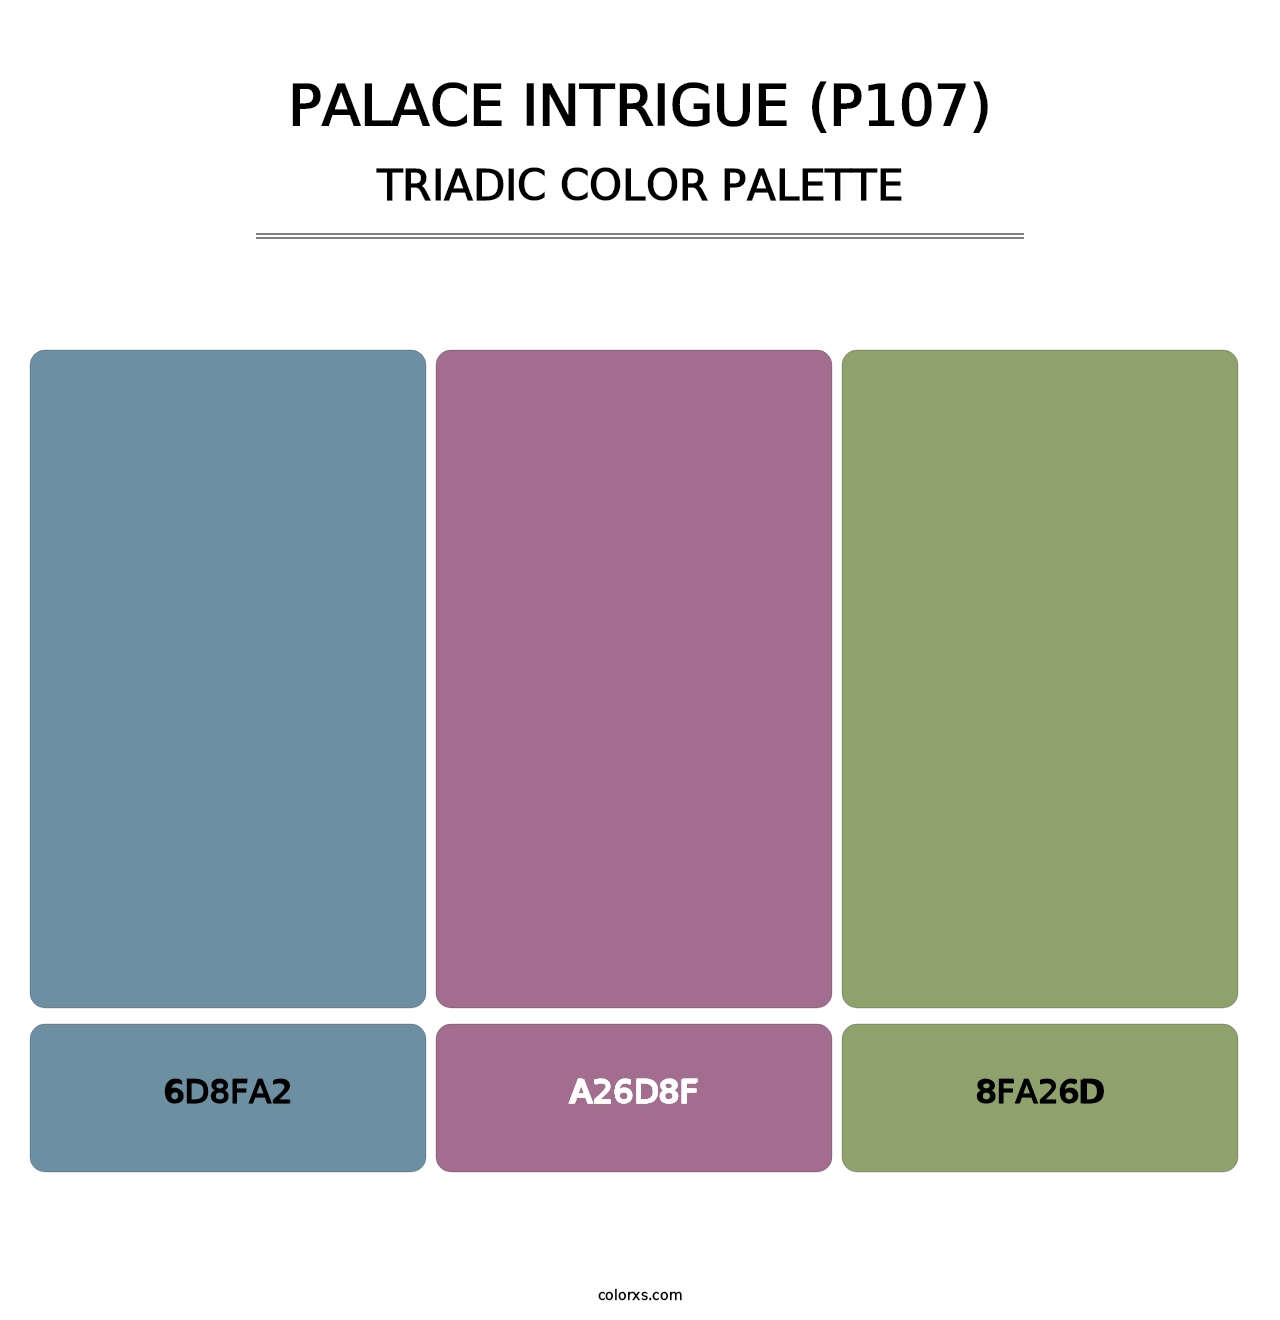 Palace Intrigue (P107) - Triadic Color Palette